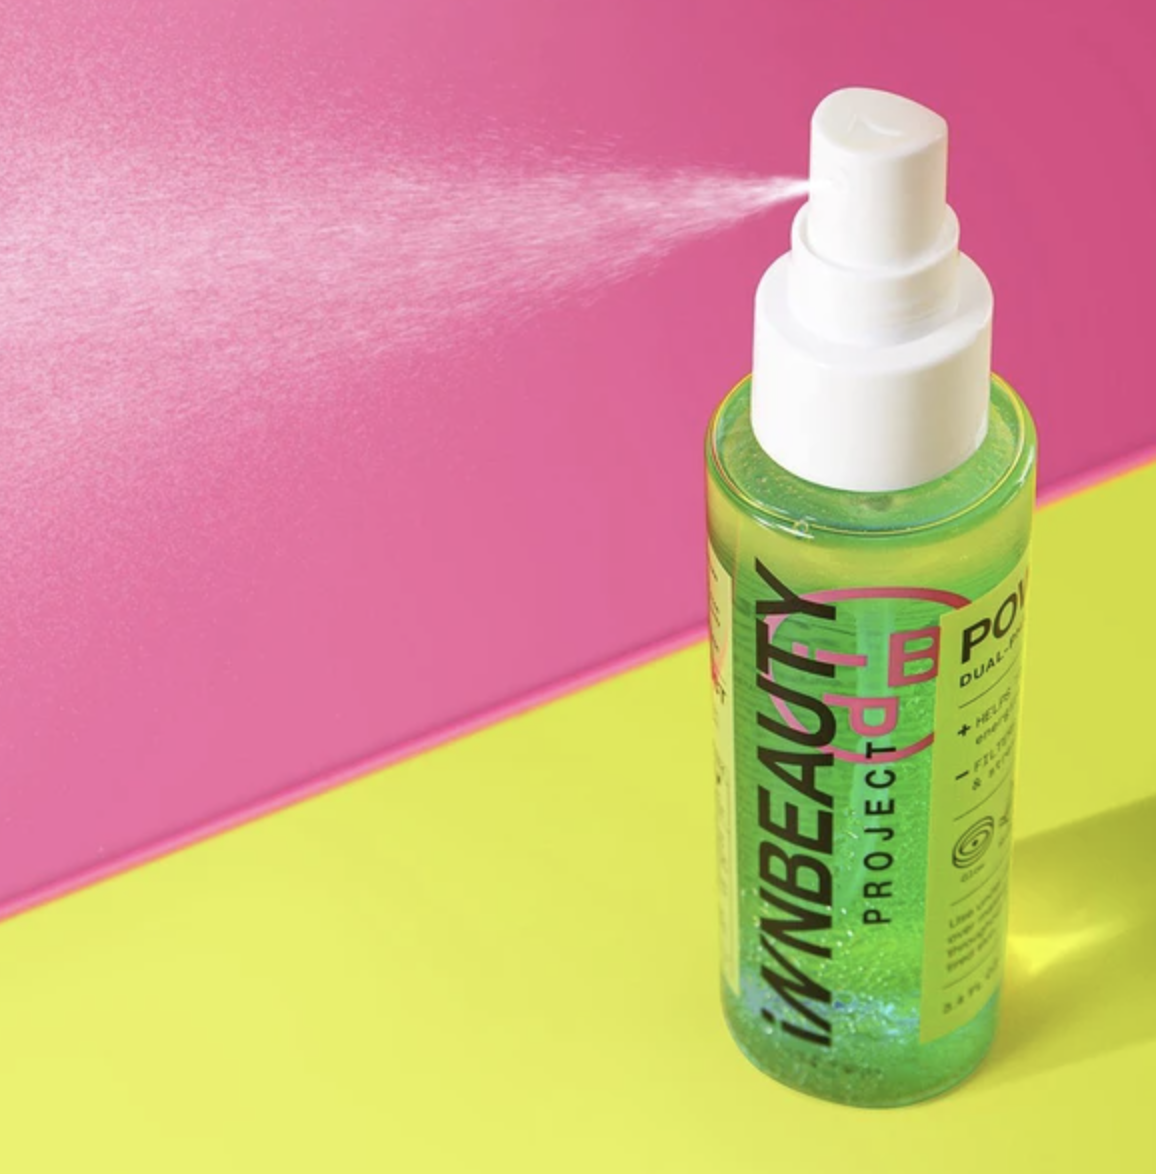 A clear bottle that says &quot;INN Beauty Project Power Up Dual-Phase Face Mist&quot; in front of a pink background